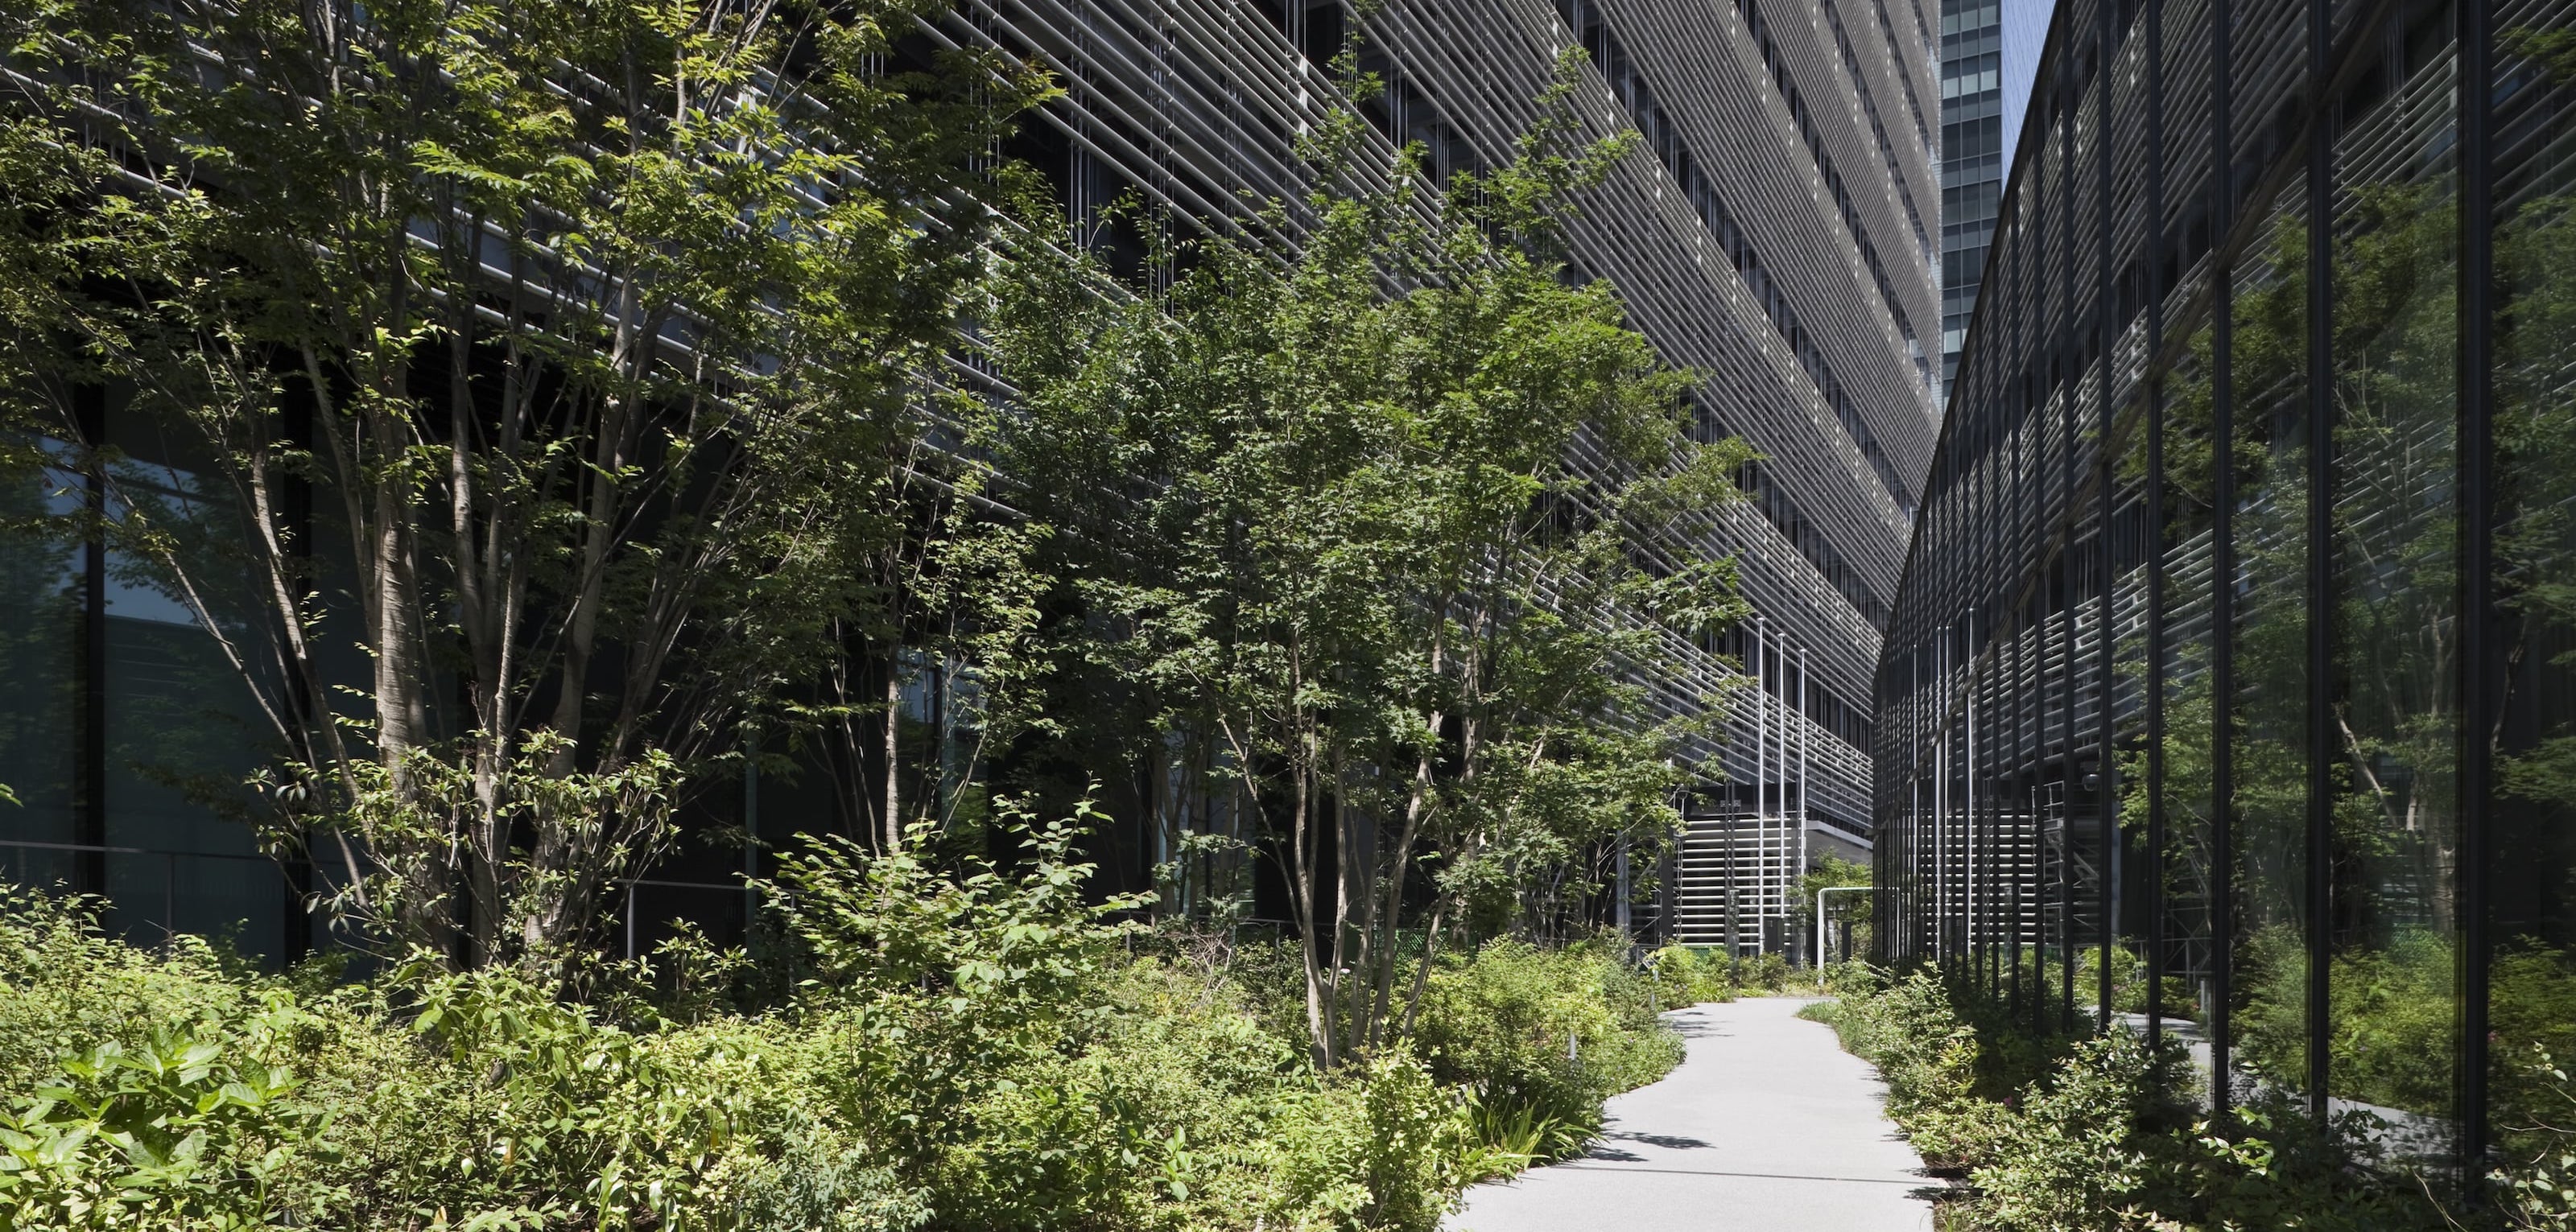 Image from within the 'Sony Forest' landscape that surrounds the NBF Osaki Building.